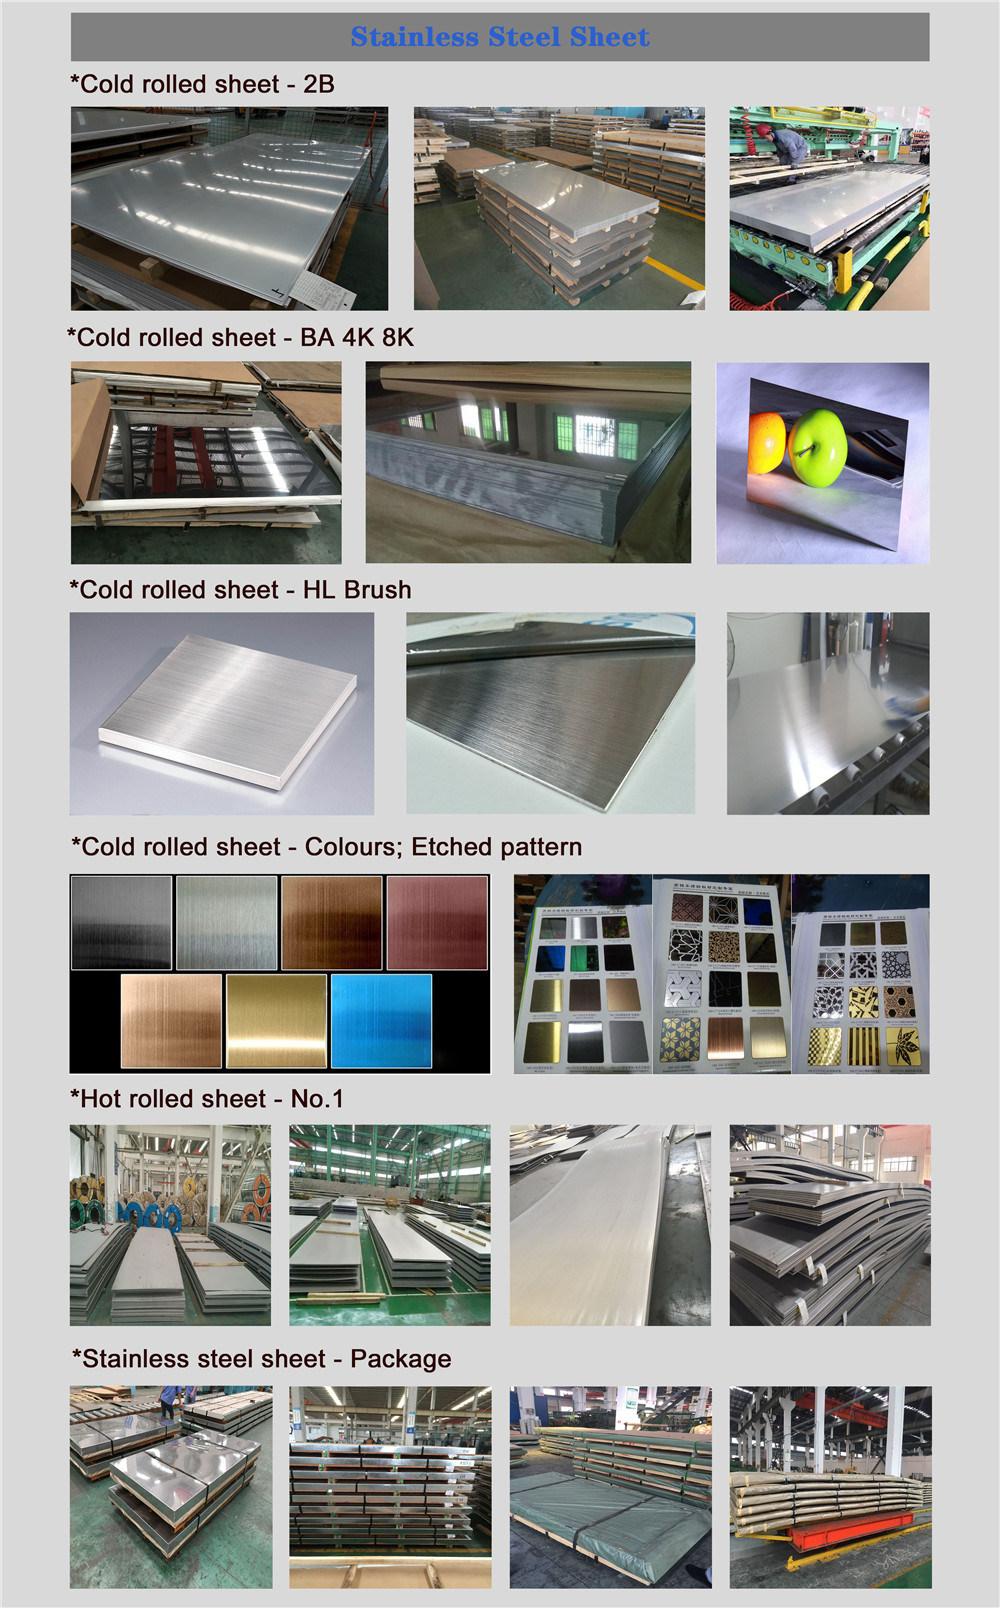 High Quality and Good Price Stainless Steel Sheet Cold Rolled Ba Hl Bushed No. 4 201 202 304 304L 316 316L Inox Sheet Stainless Steel Plate